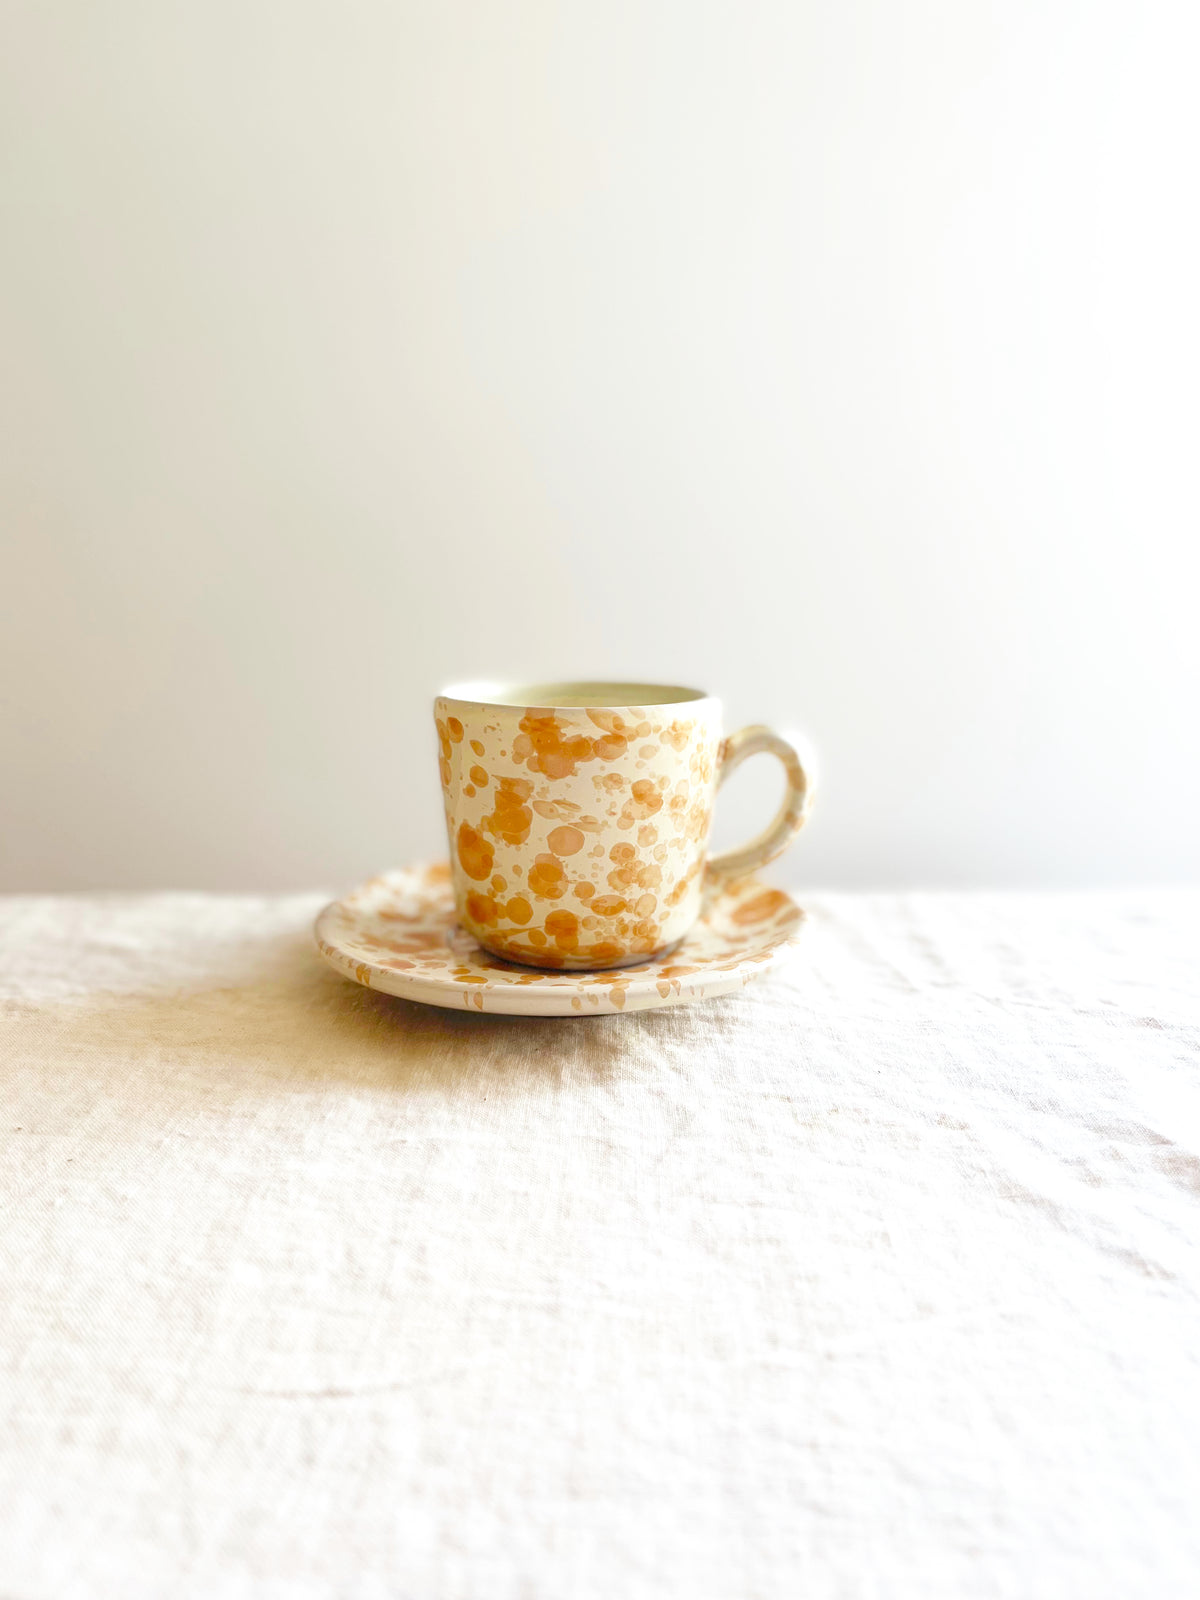 Splatter Espresso Cup and Saucer by Fasanoceramiche